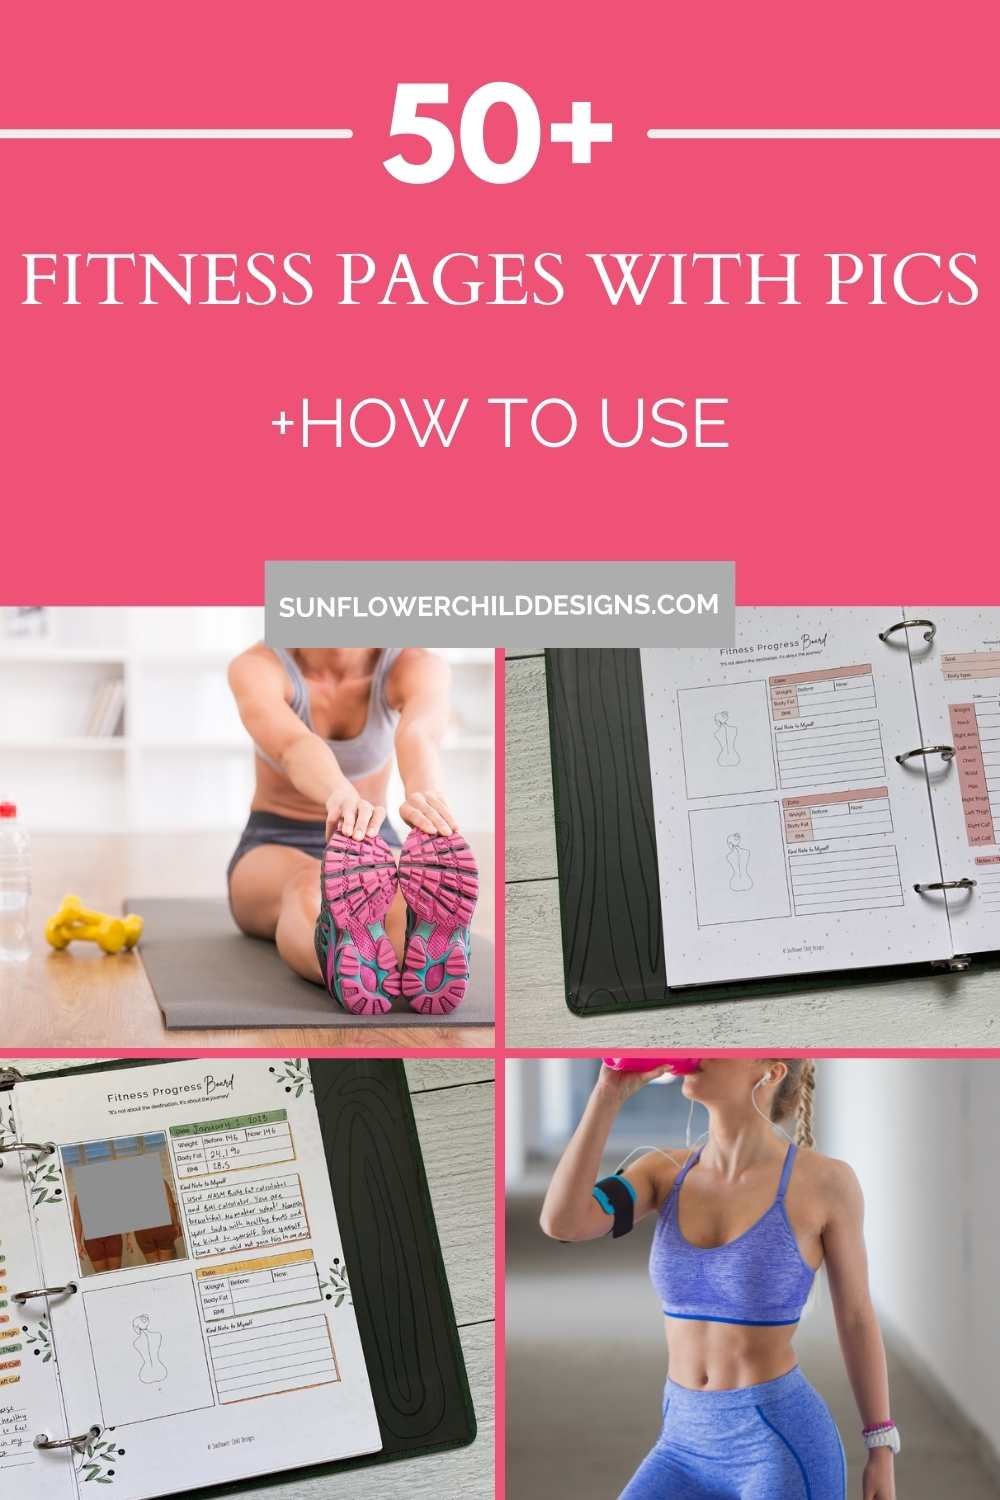 Kickstart Your Fitness Journey with 50+ Inspirational Planner Pages